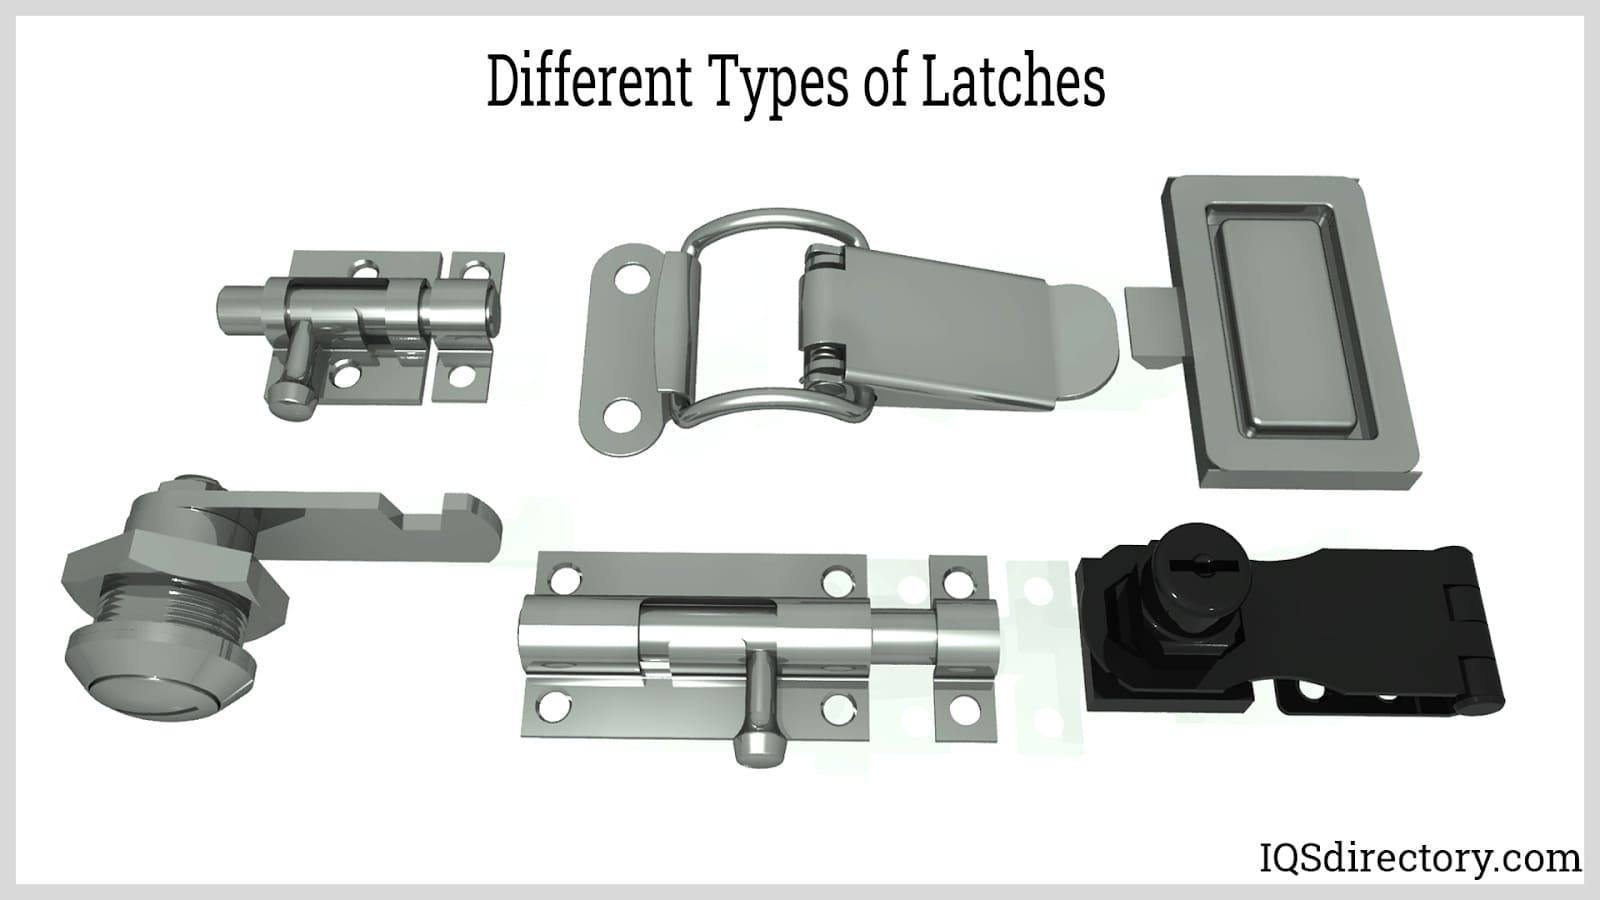 Hook with Safety Latch - companies search